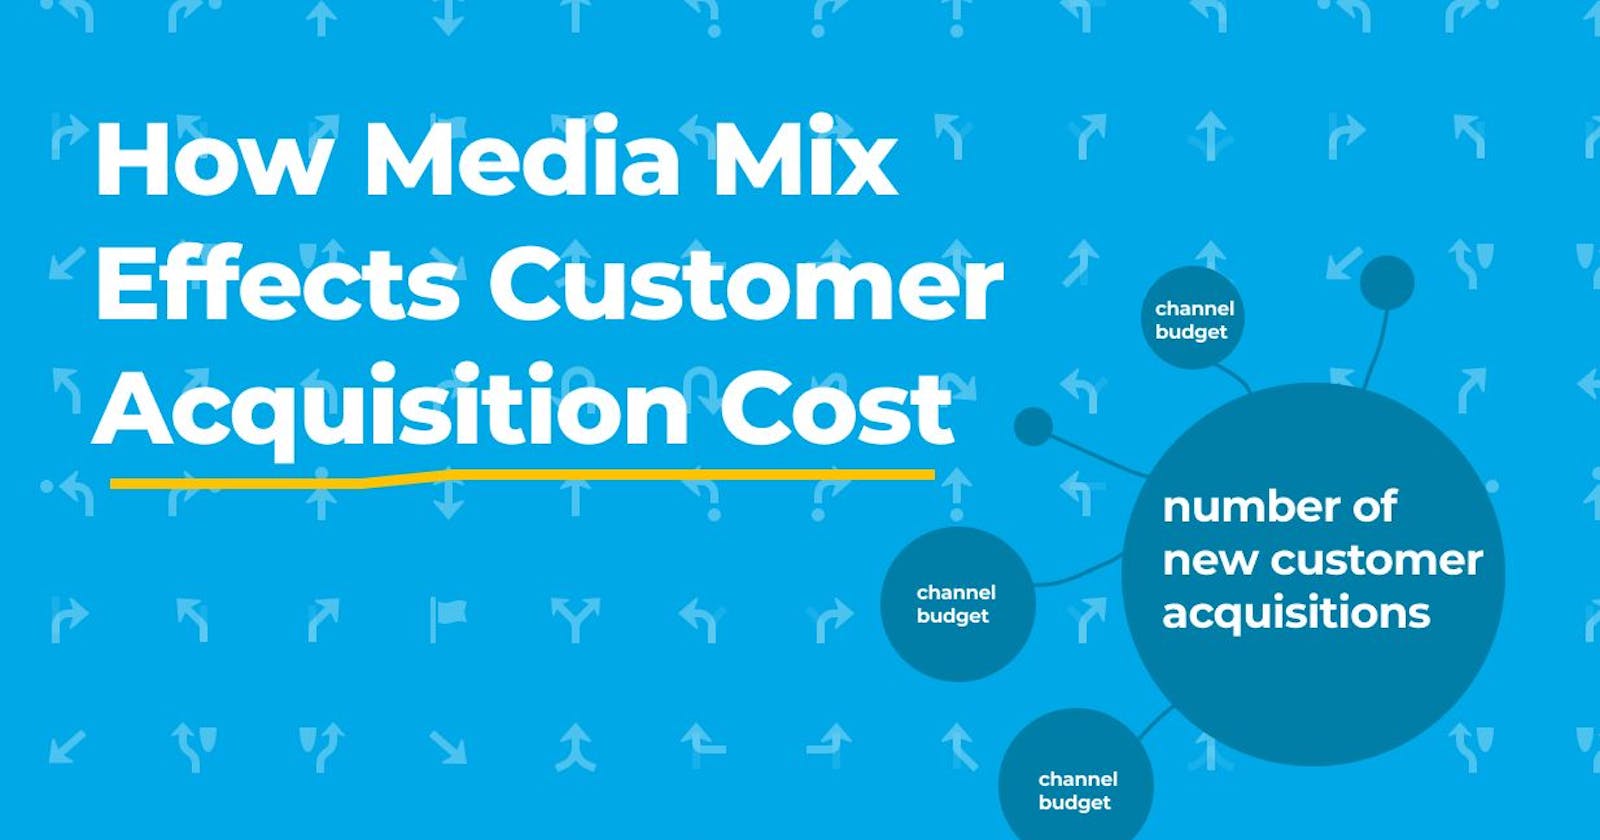 How Your Media Mix Effects Customer Acquisition Cost